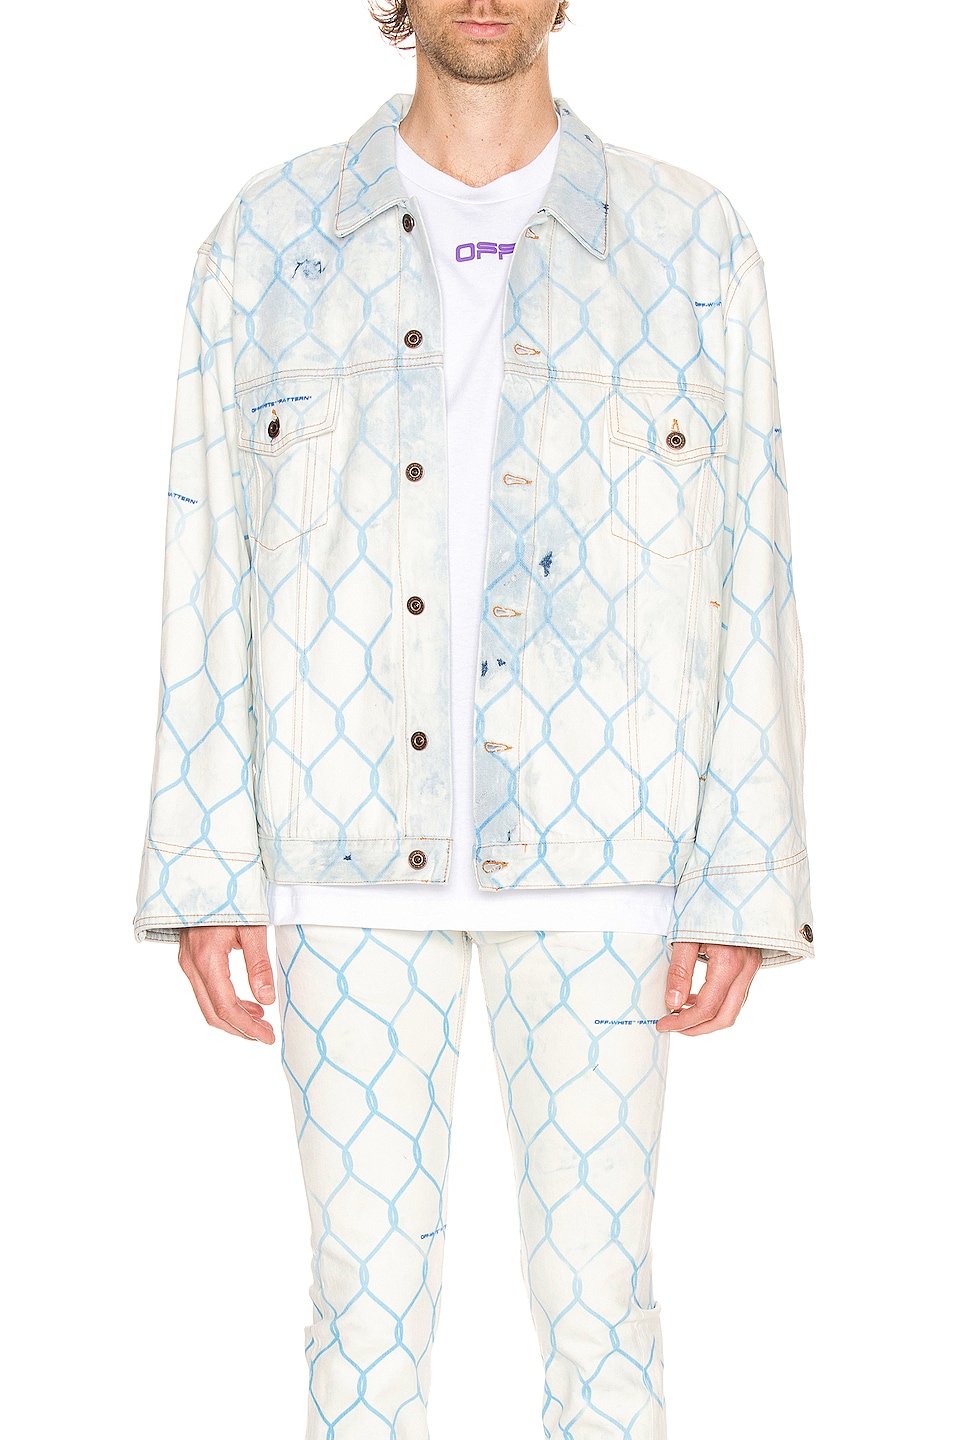 Image 1 of OFF-WHITE Fence Jeans Jacket in Bleach Light Blue